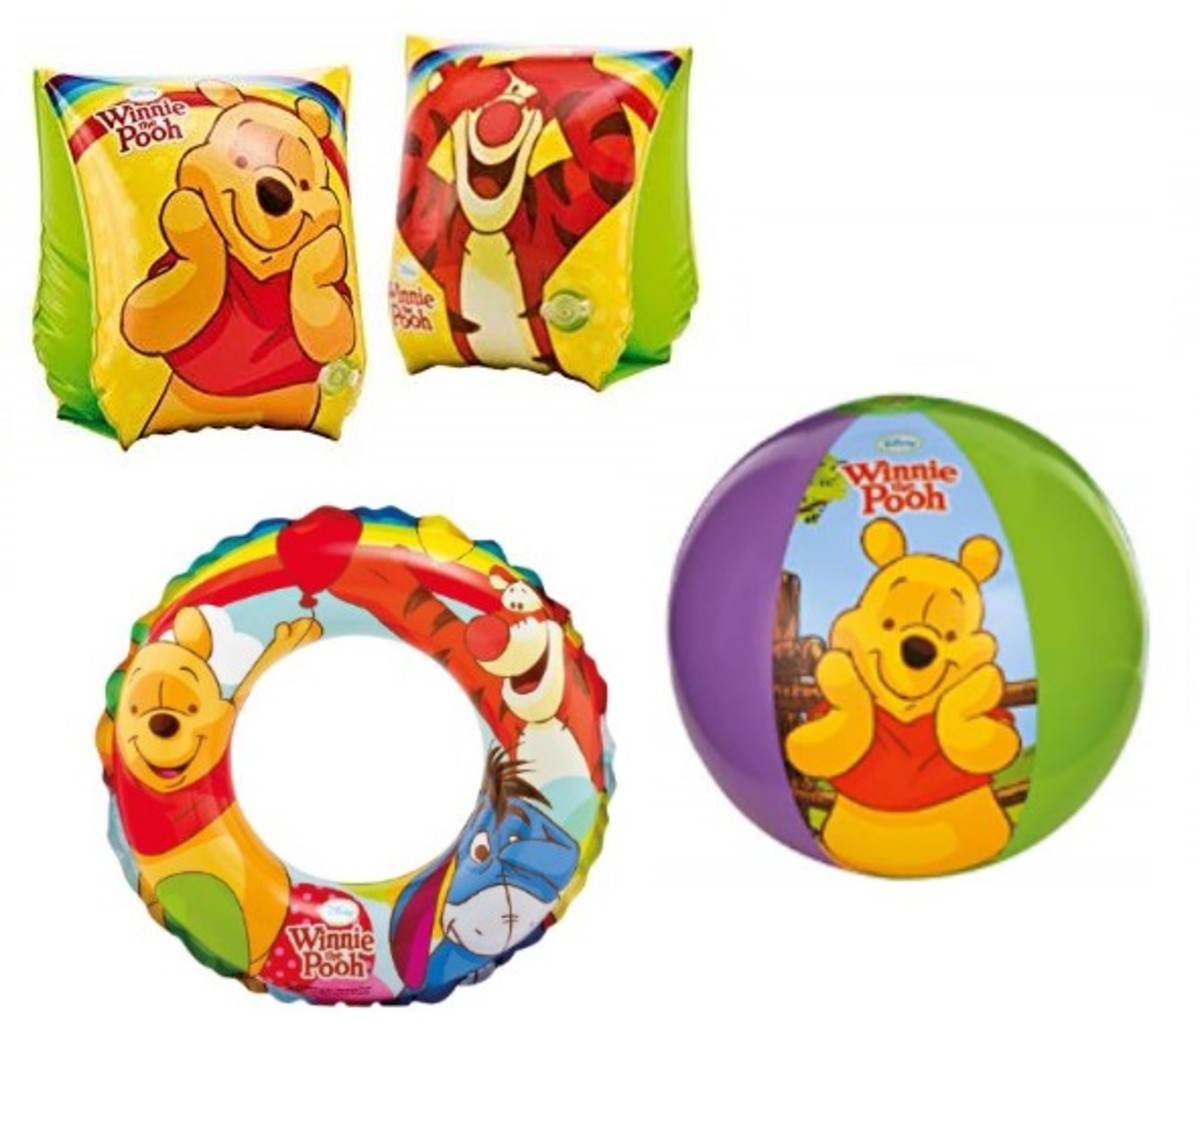 Winnie the Pooh Full Swimming Package (Armbands + Beach Ball + Swimming Ring) Individual Package